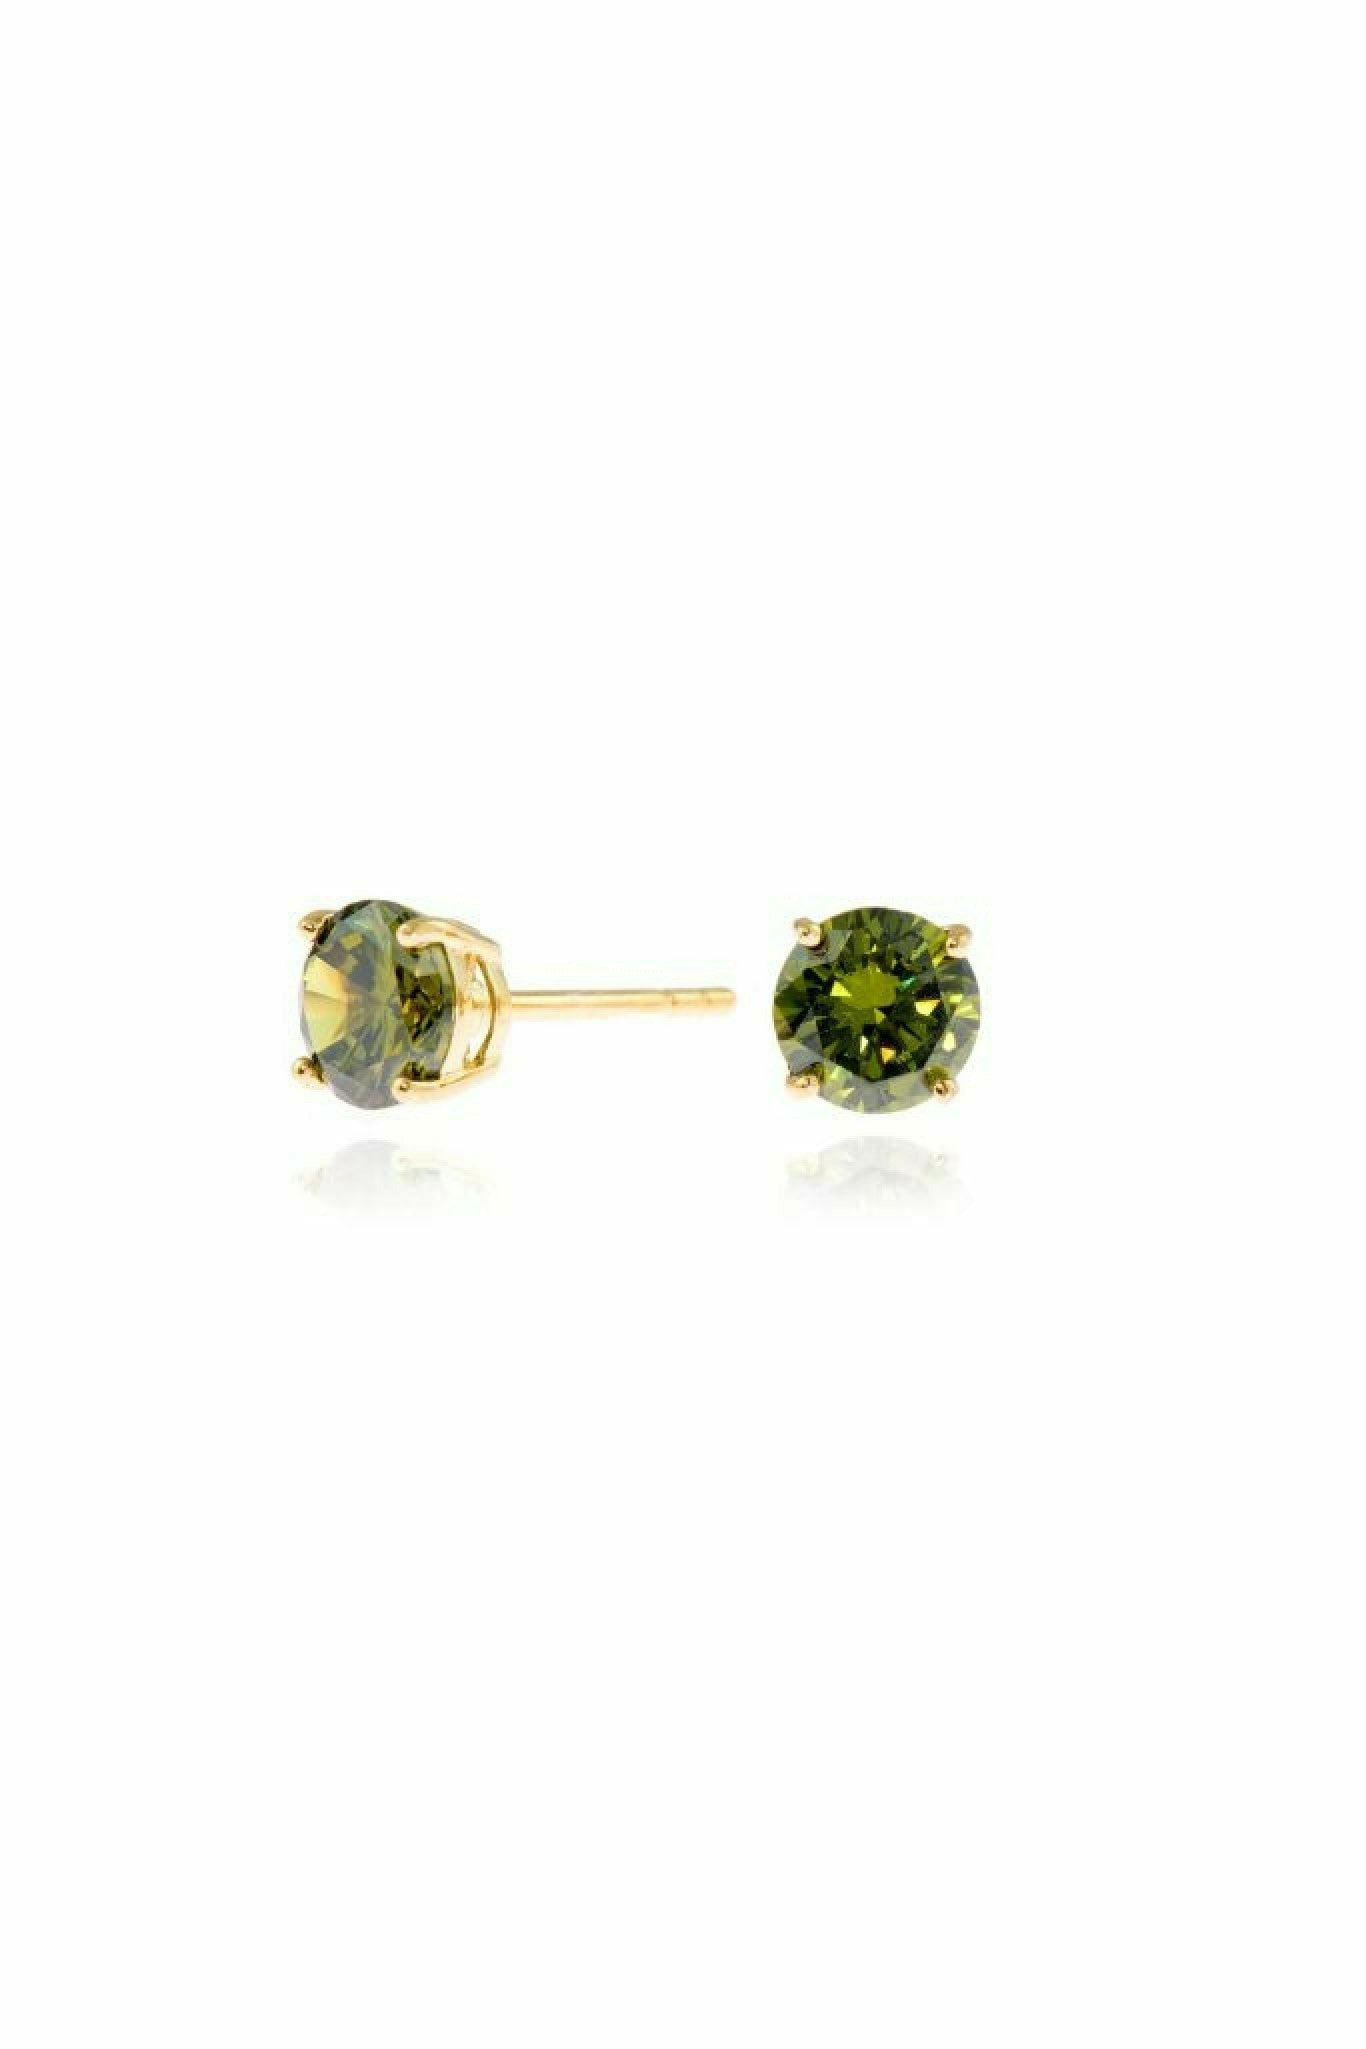 Lana 6mm-Sterling Silver, 18ct Gold Plated earrings with Olivine CZ Cachet London